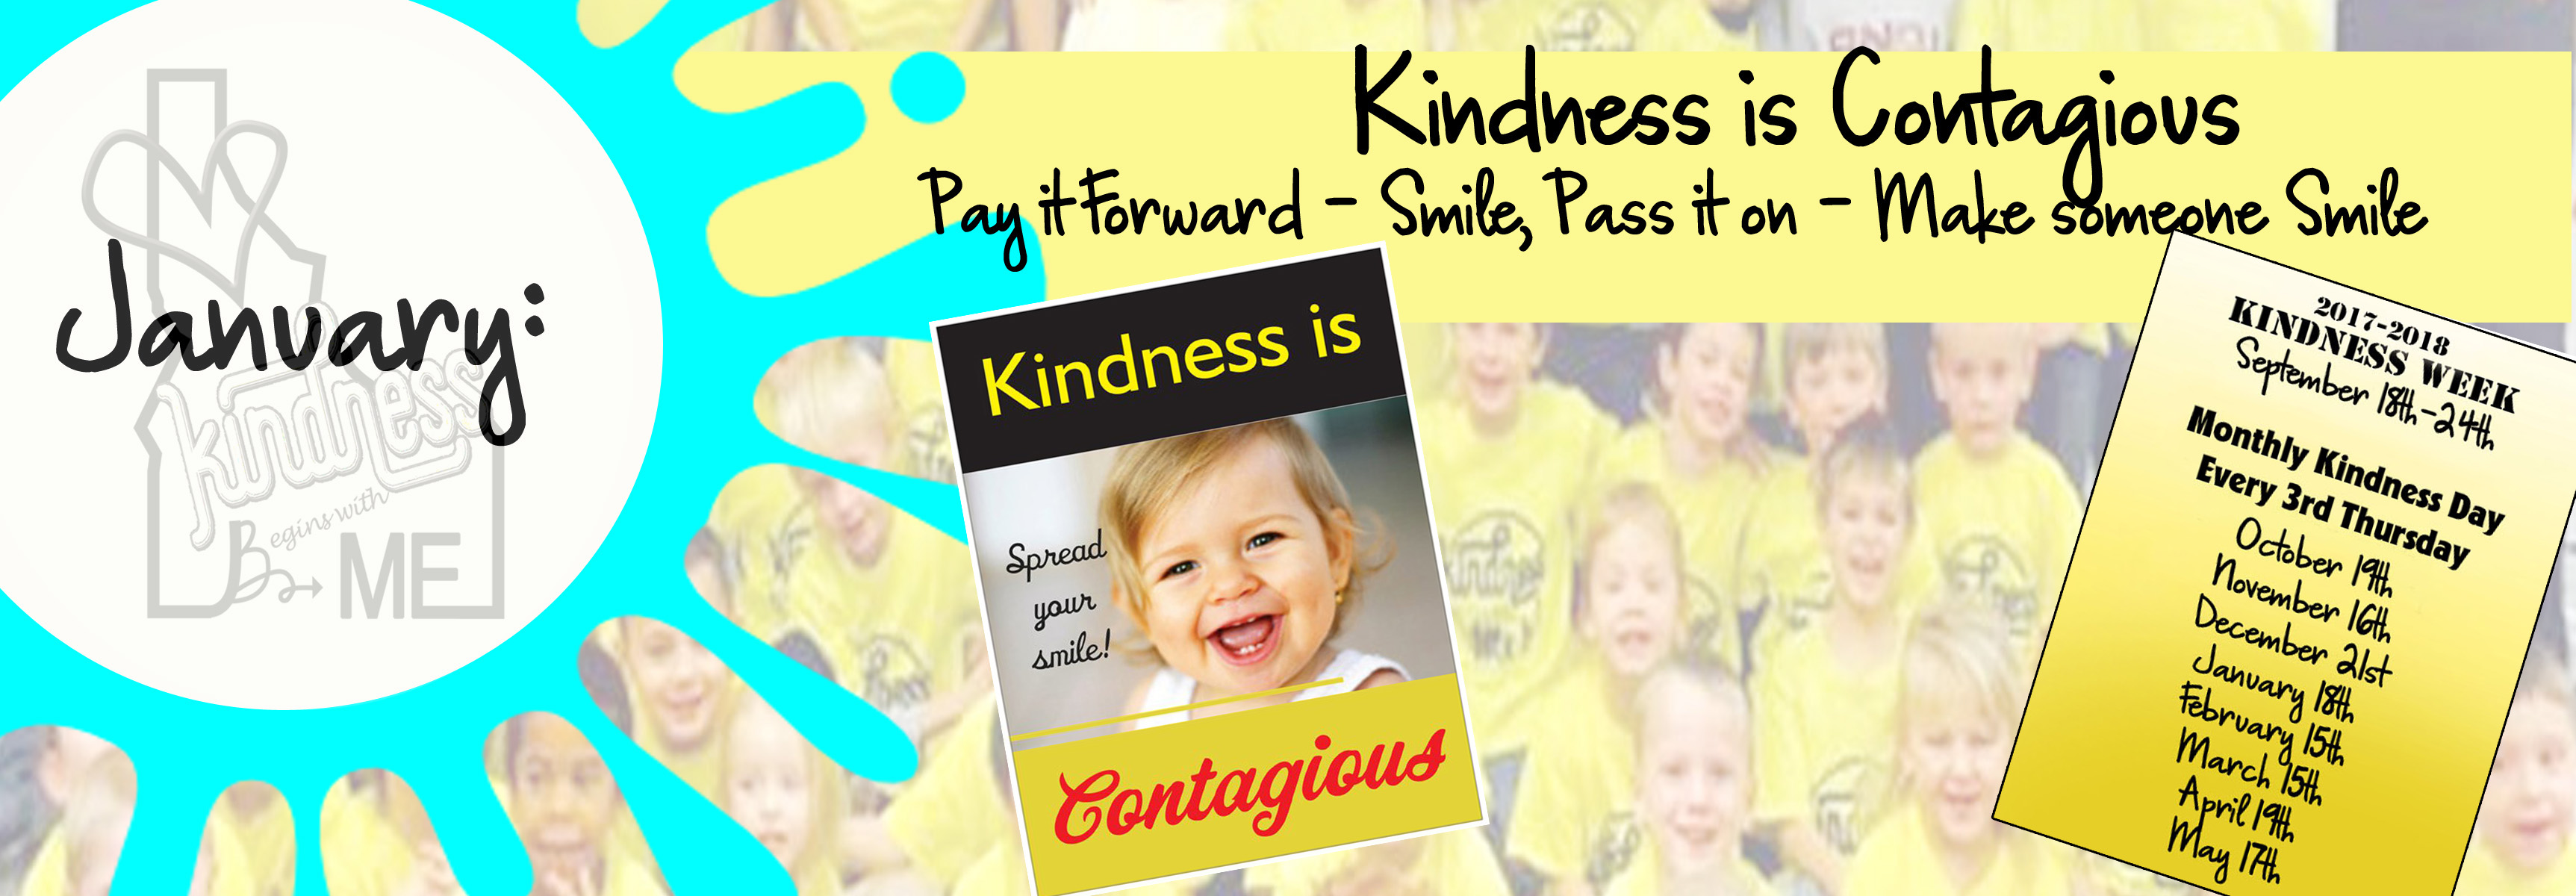 Tomorrow is January’s Kindness Day  – Thursday, January 18th, 2018 – Kindness is Contagious